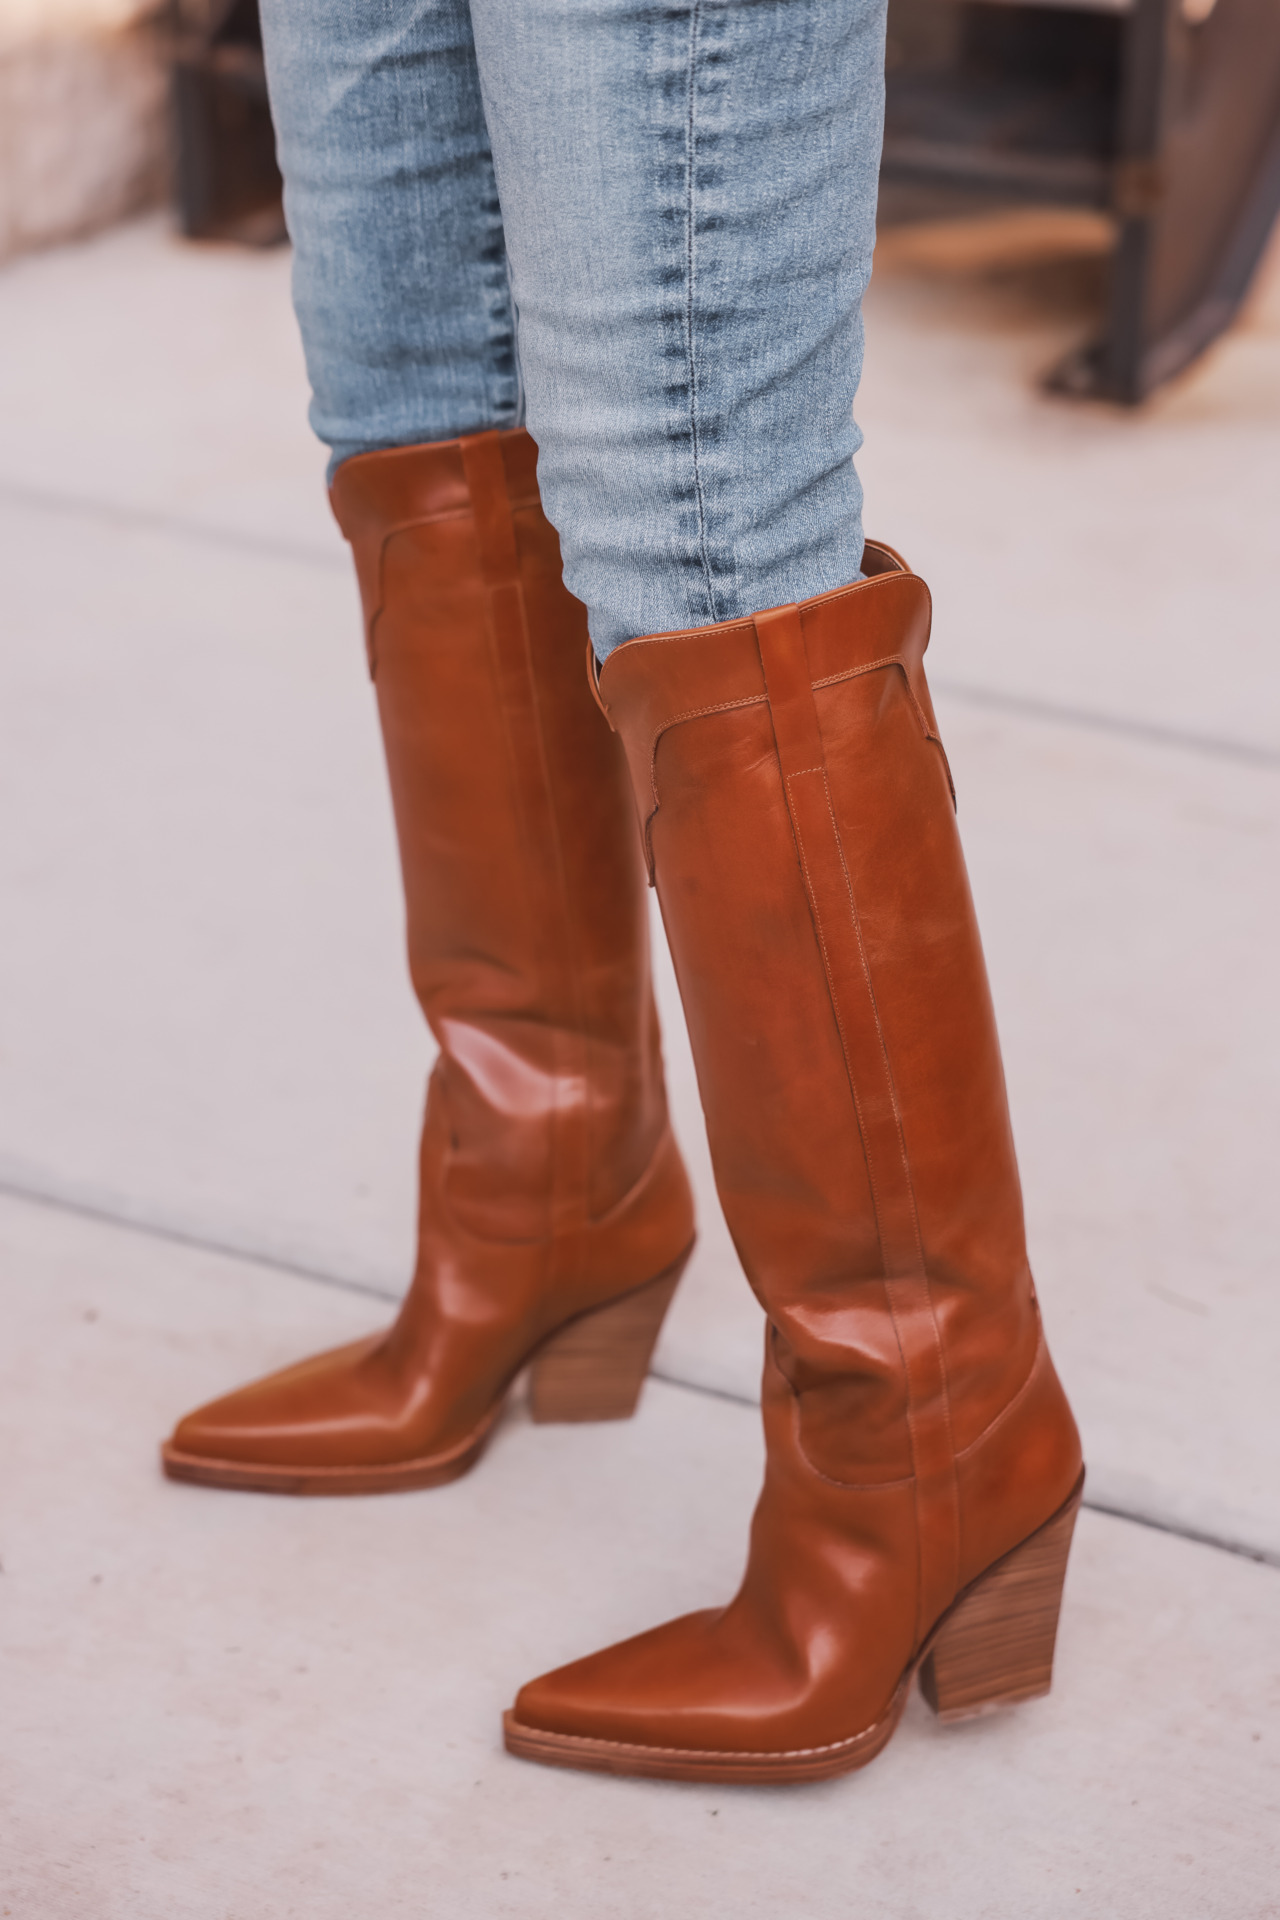 killer brown boots | Women's Boots and Booties